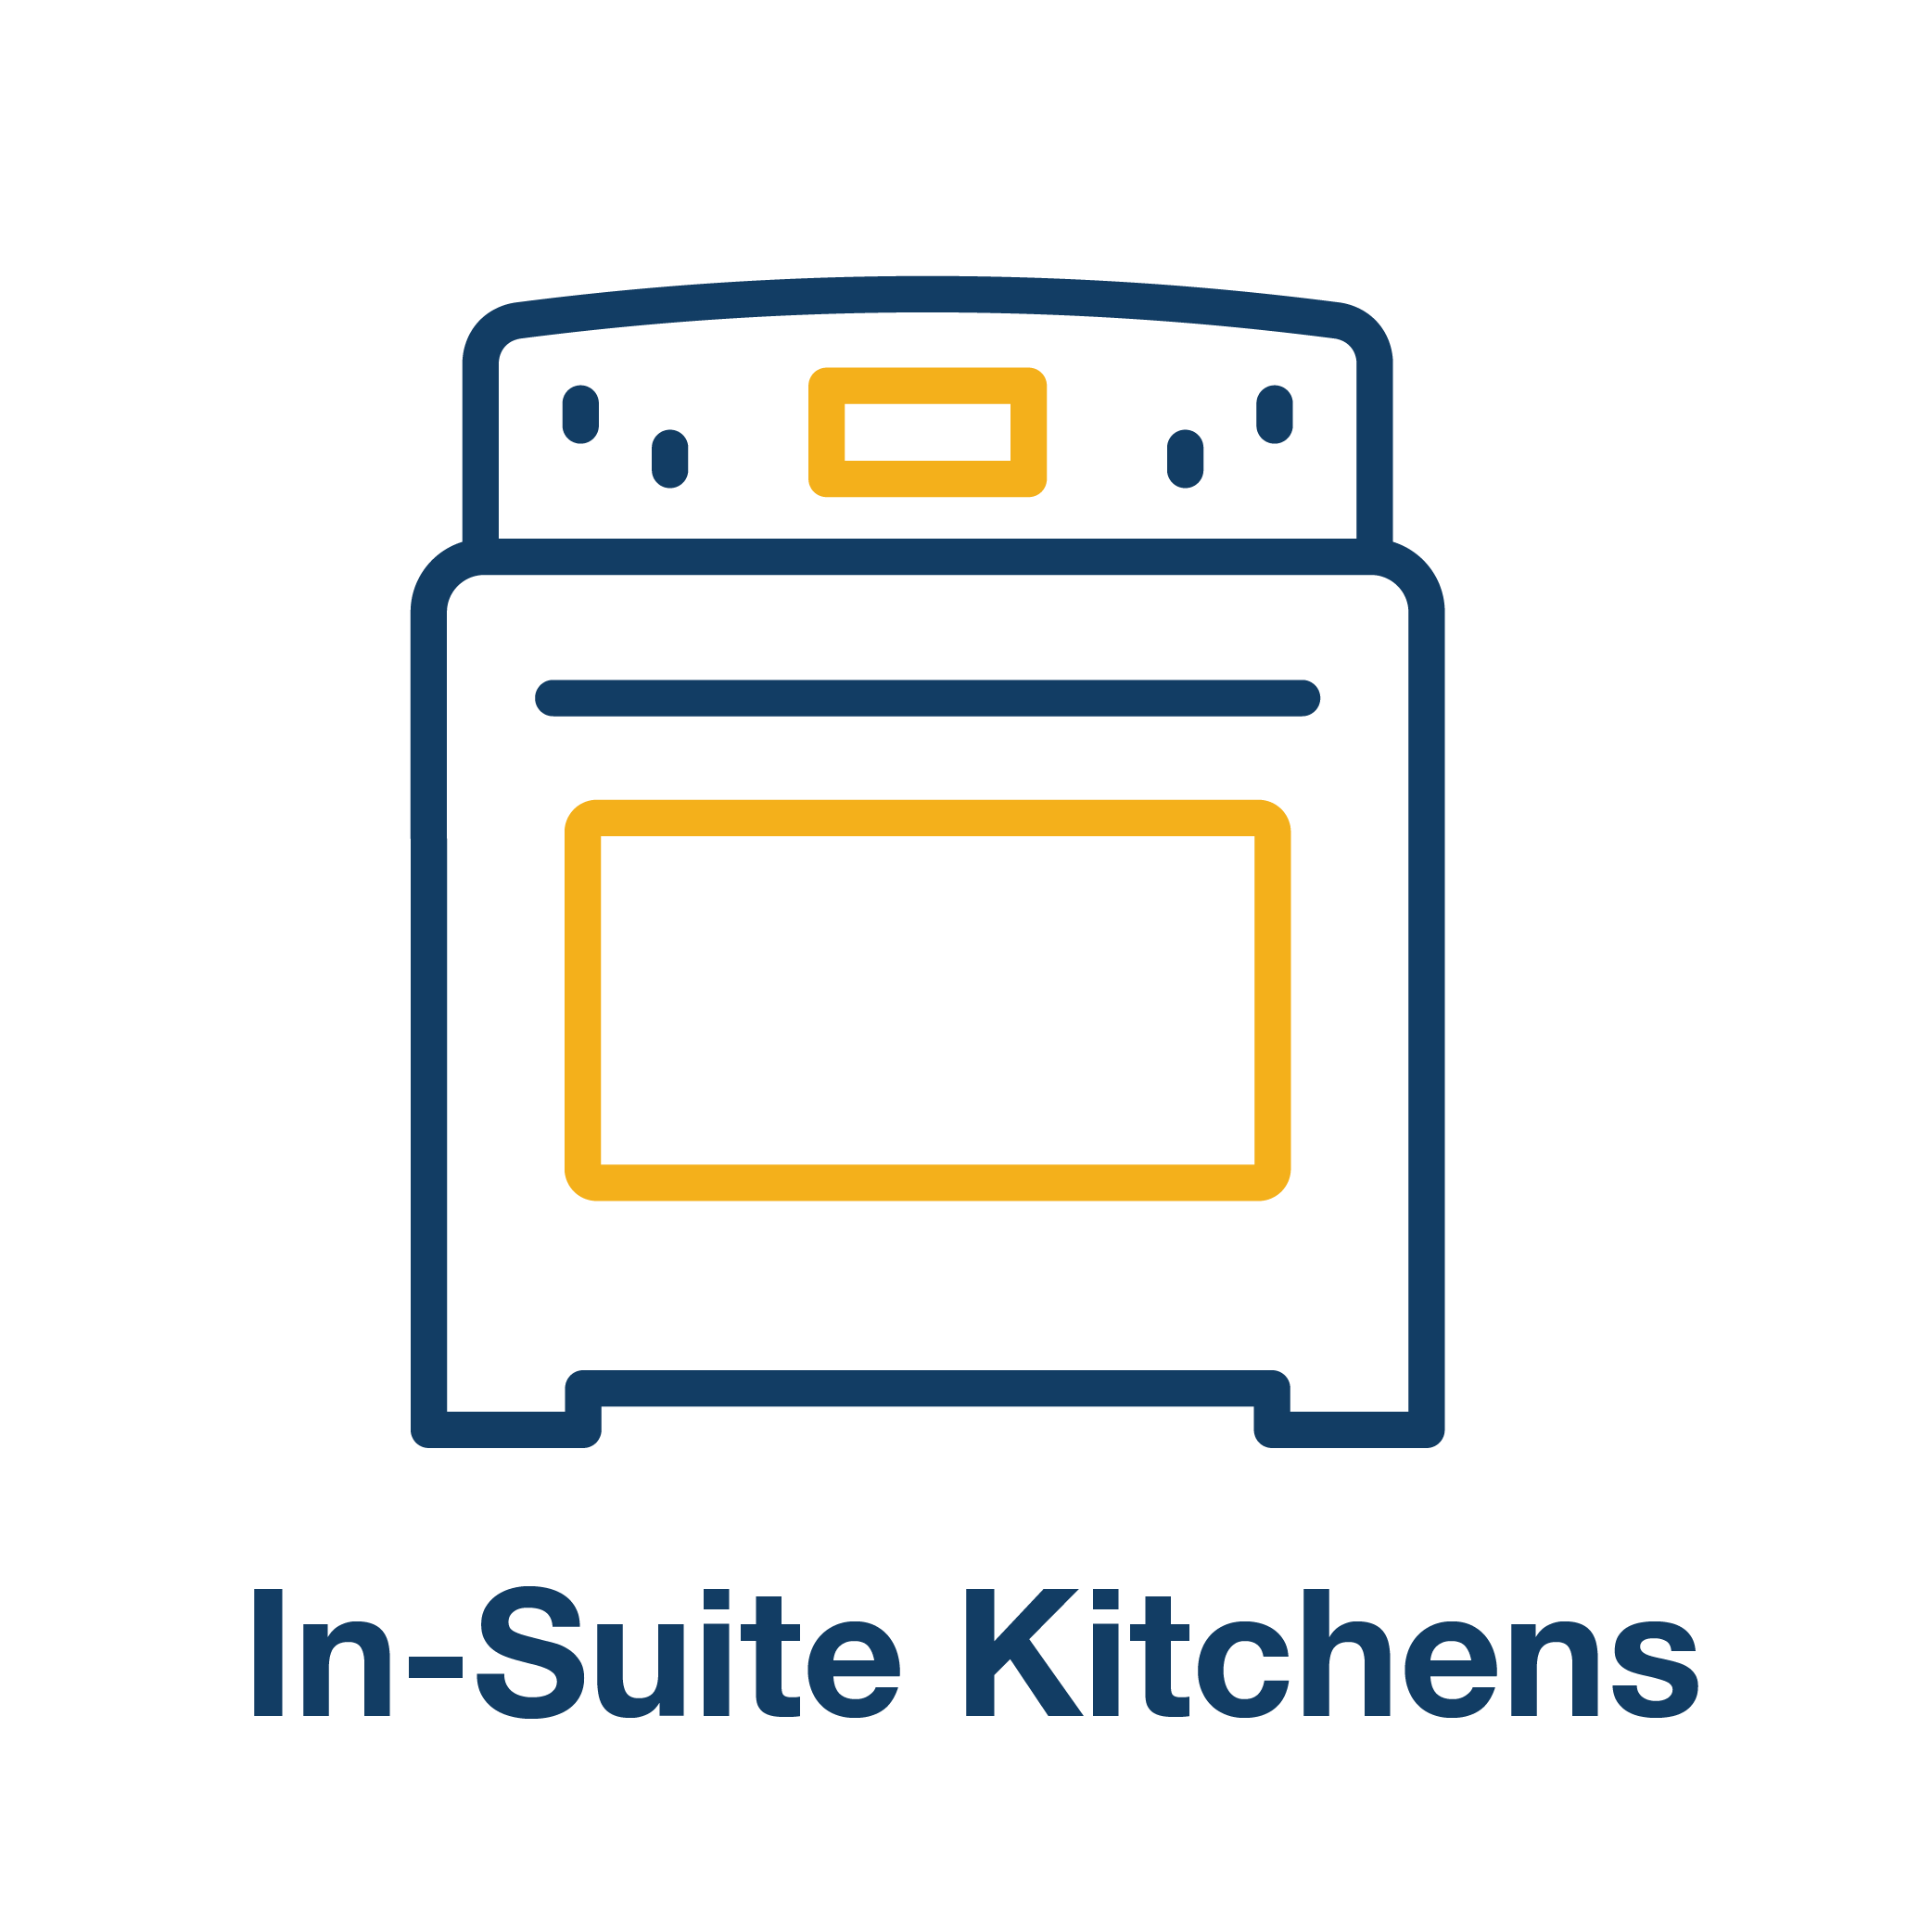 In-Suite Kitchens